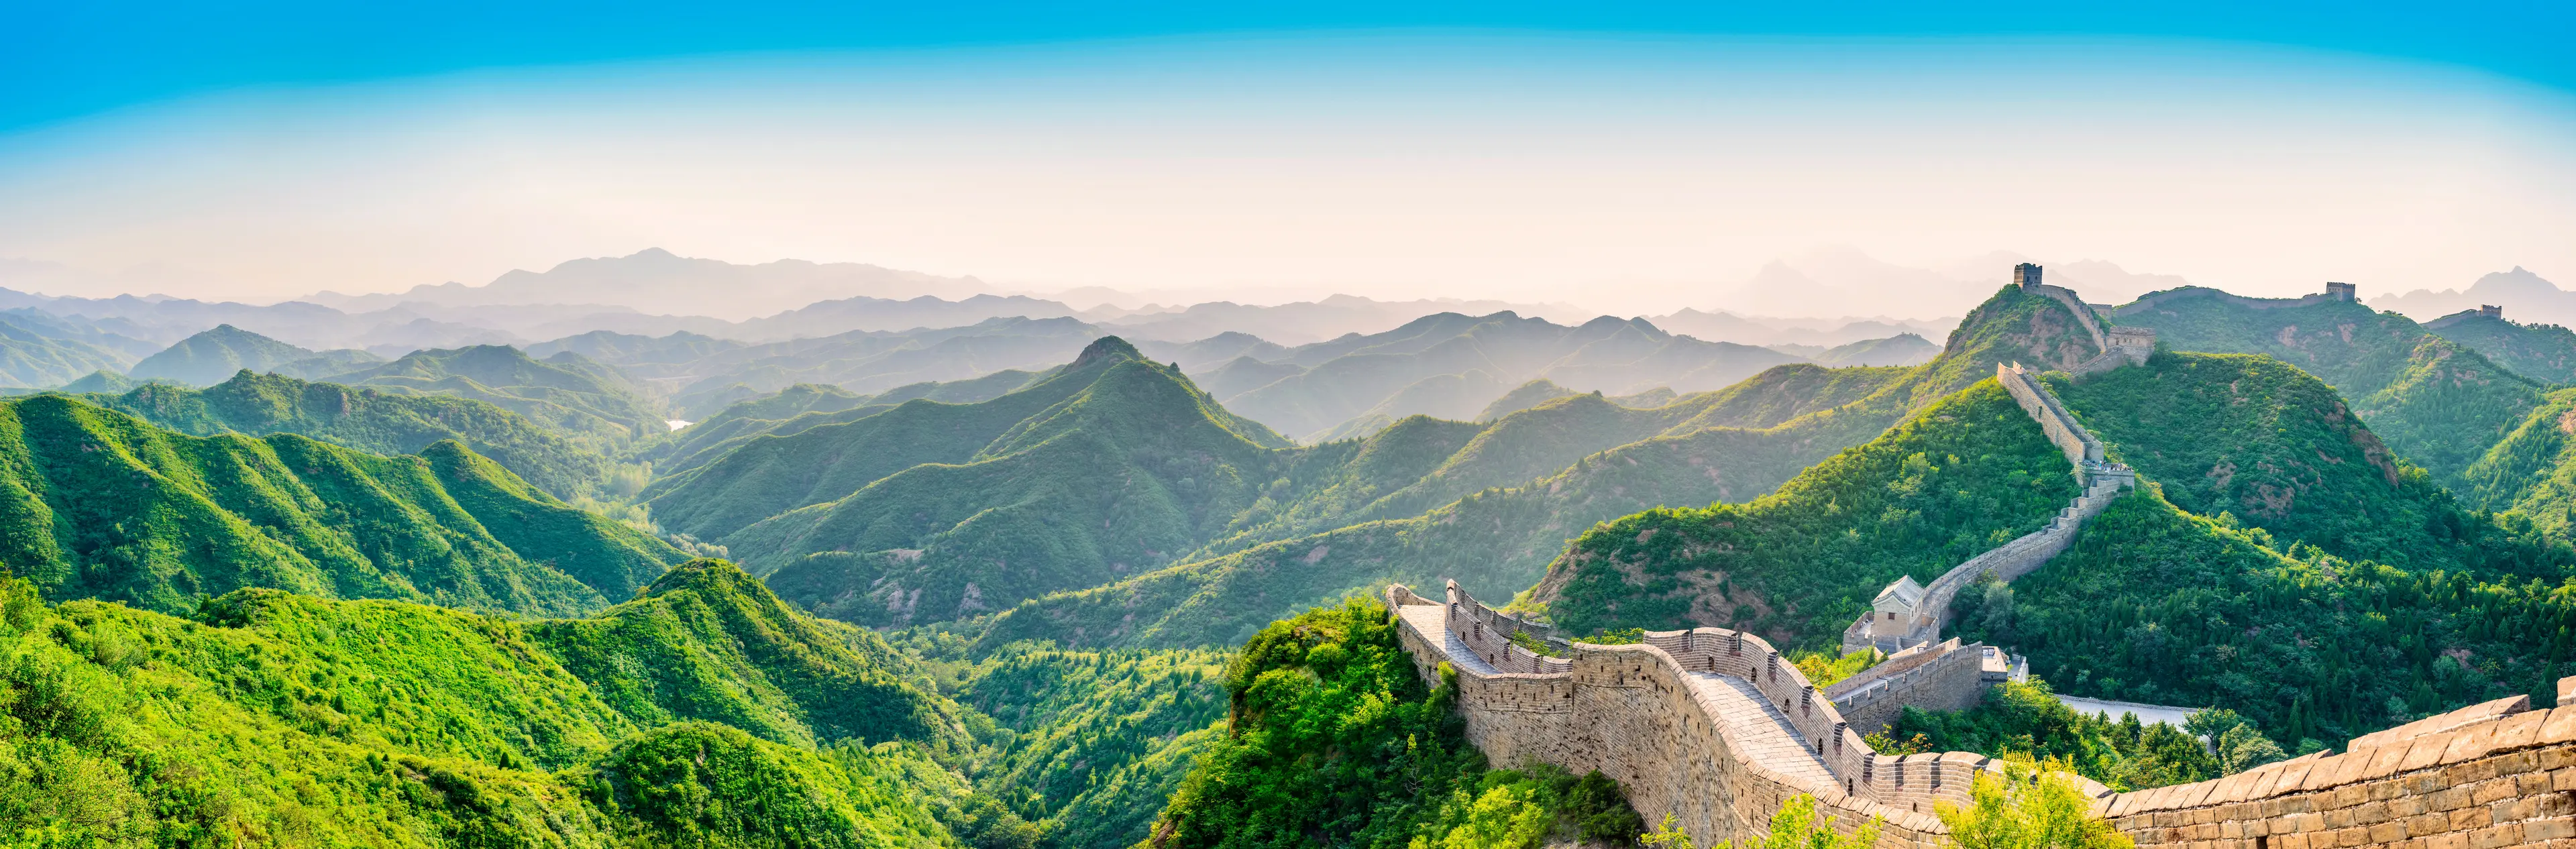 1-Day Local Experience: Solo Sightseeing at the Great Wall of China